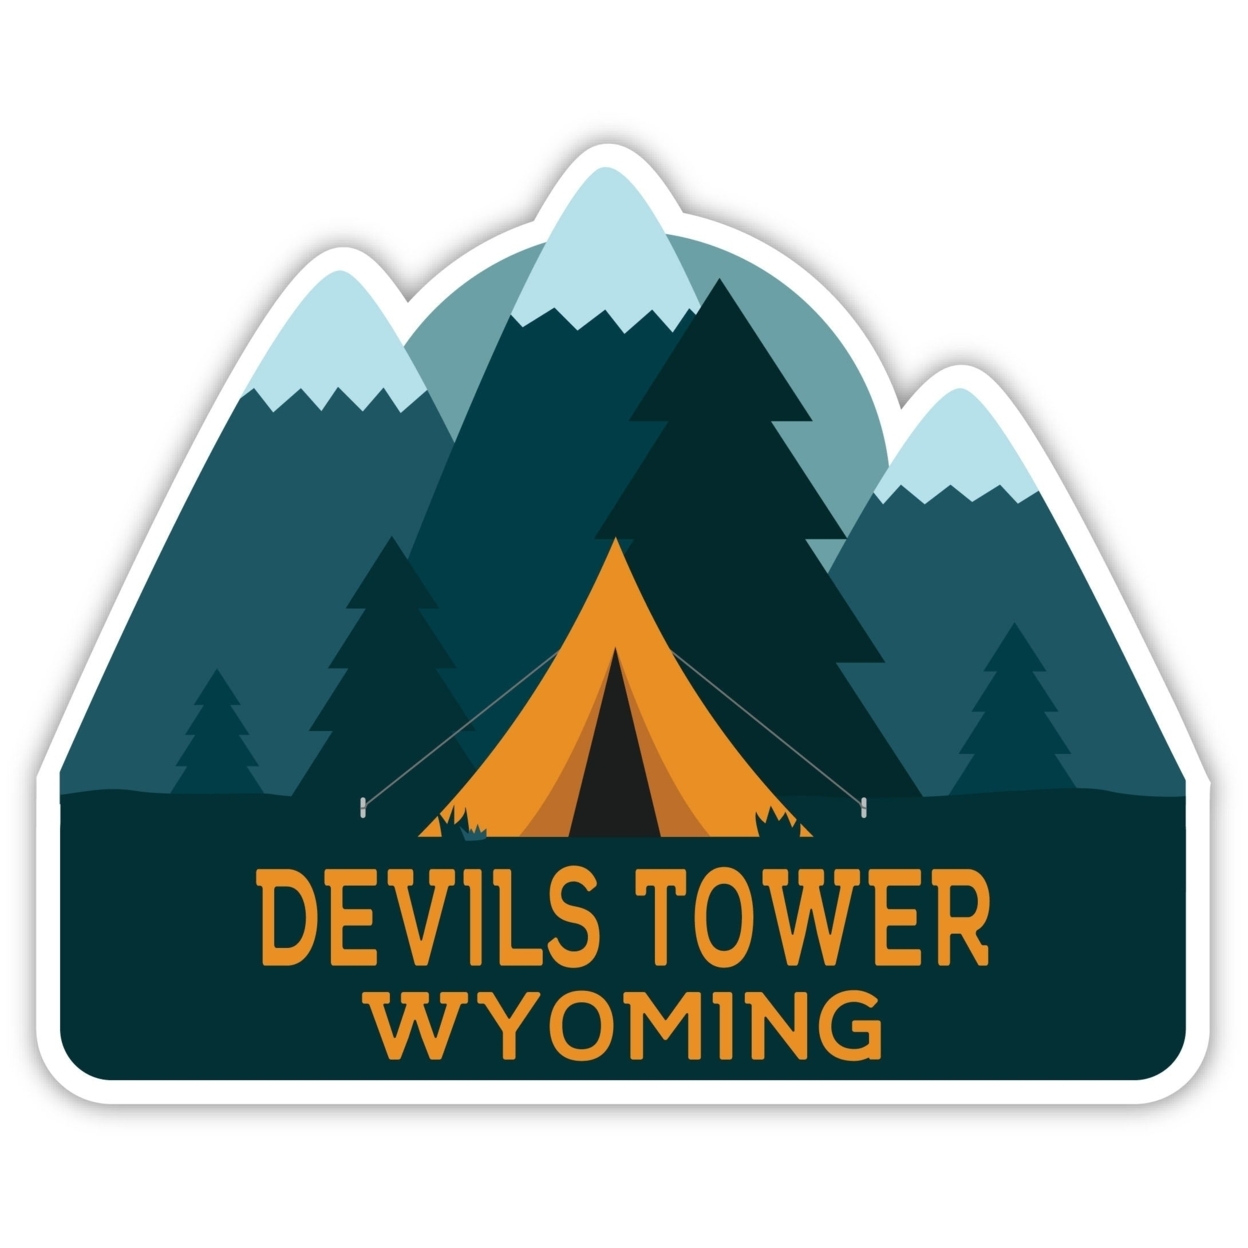 Devils Tower Wyoming Souvenir Decorative Stickers (Choose Theme And Size) - 4-Pack, 2-Inch, Great Outdoors